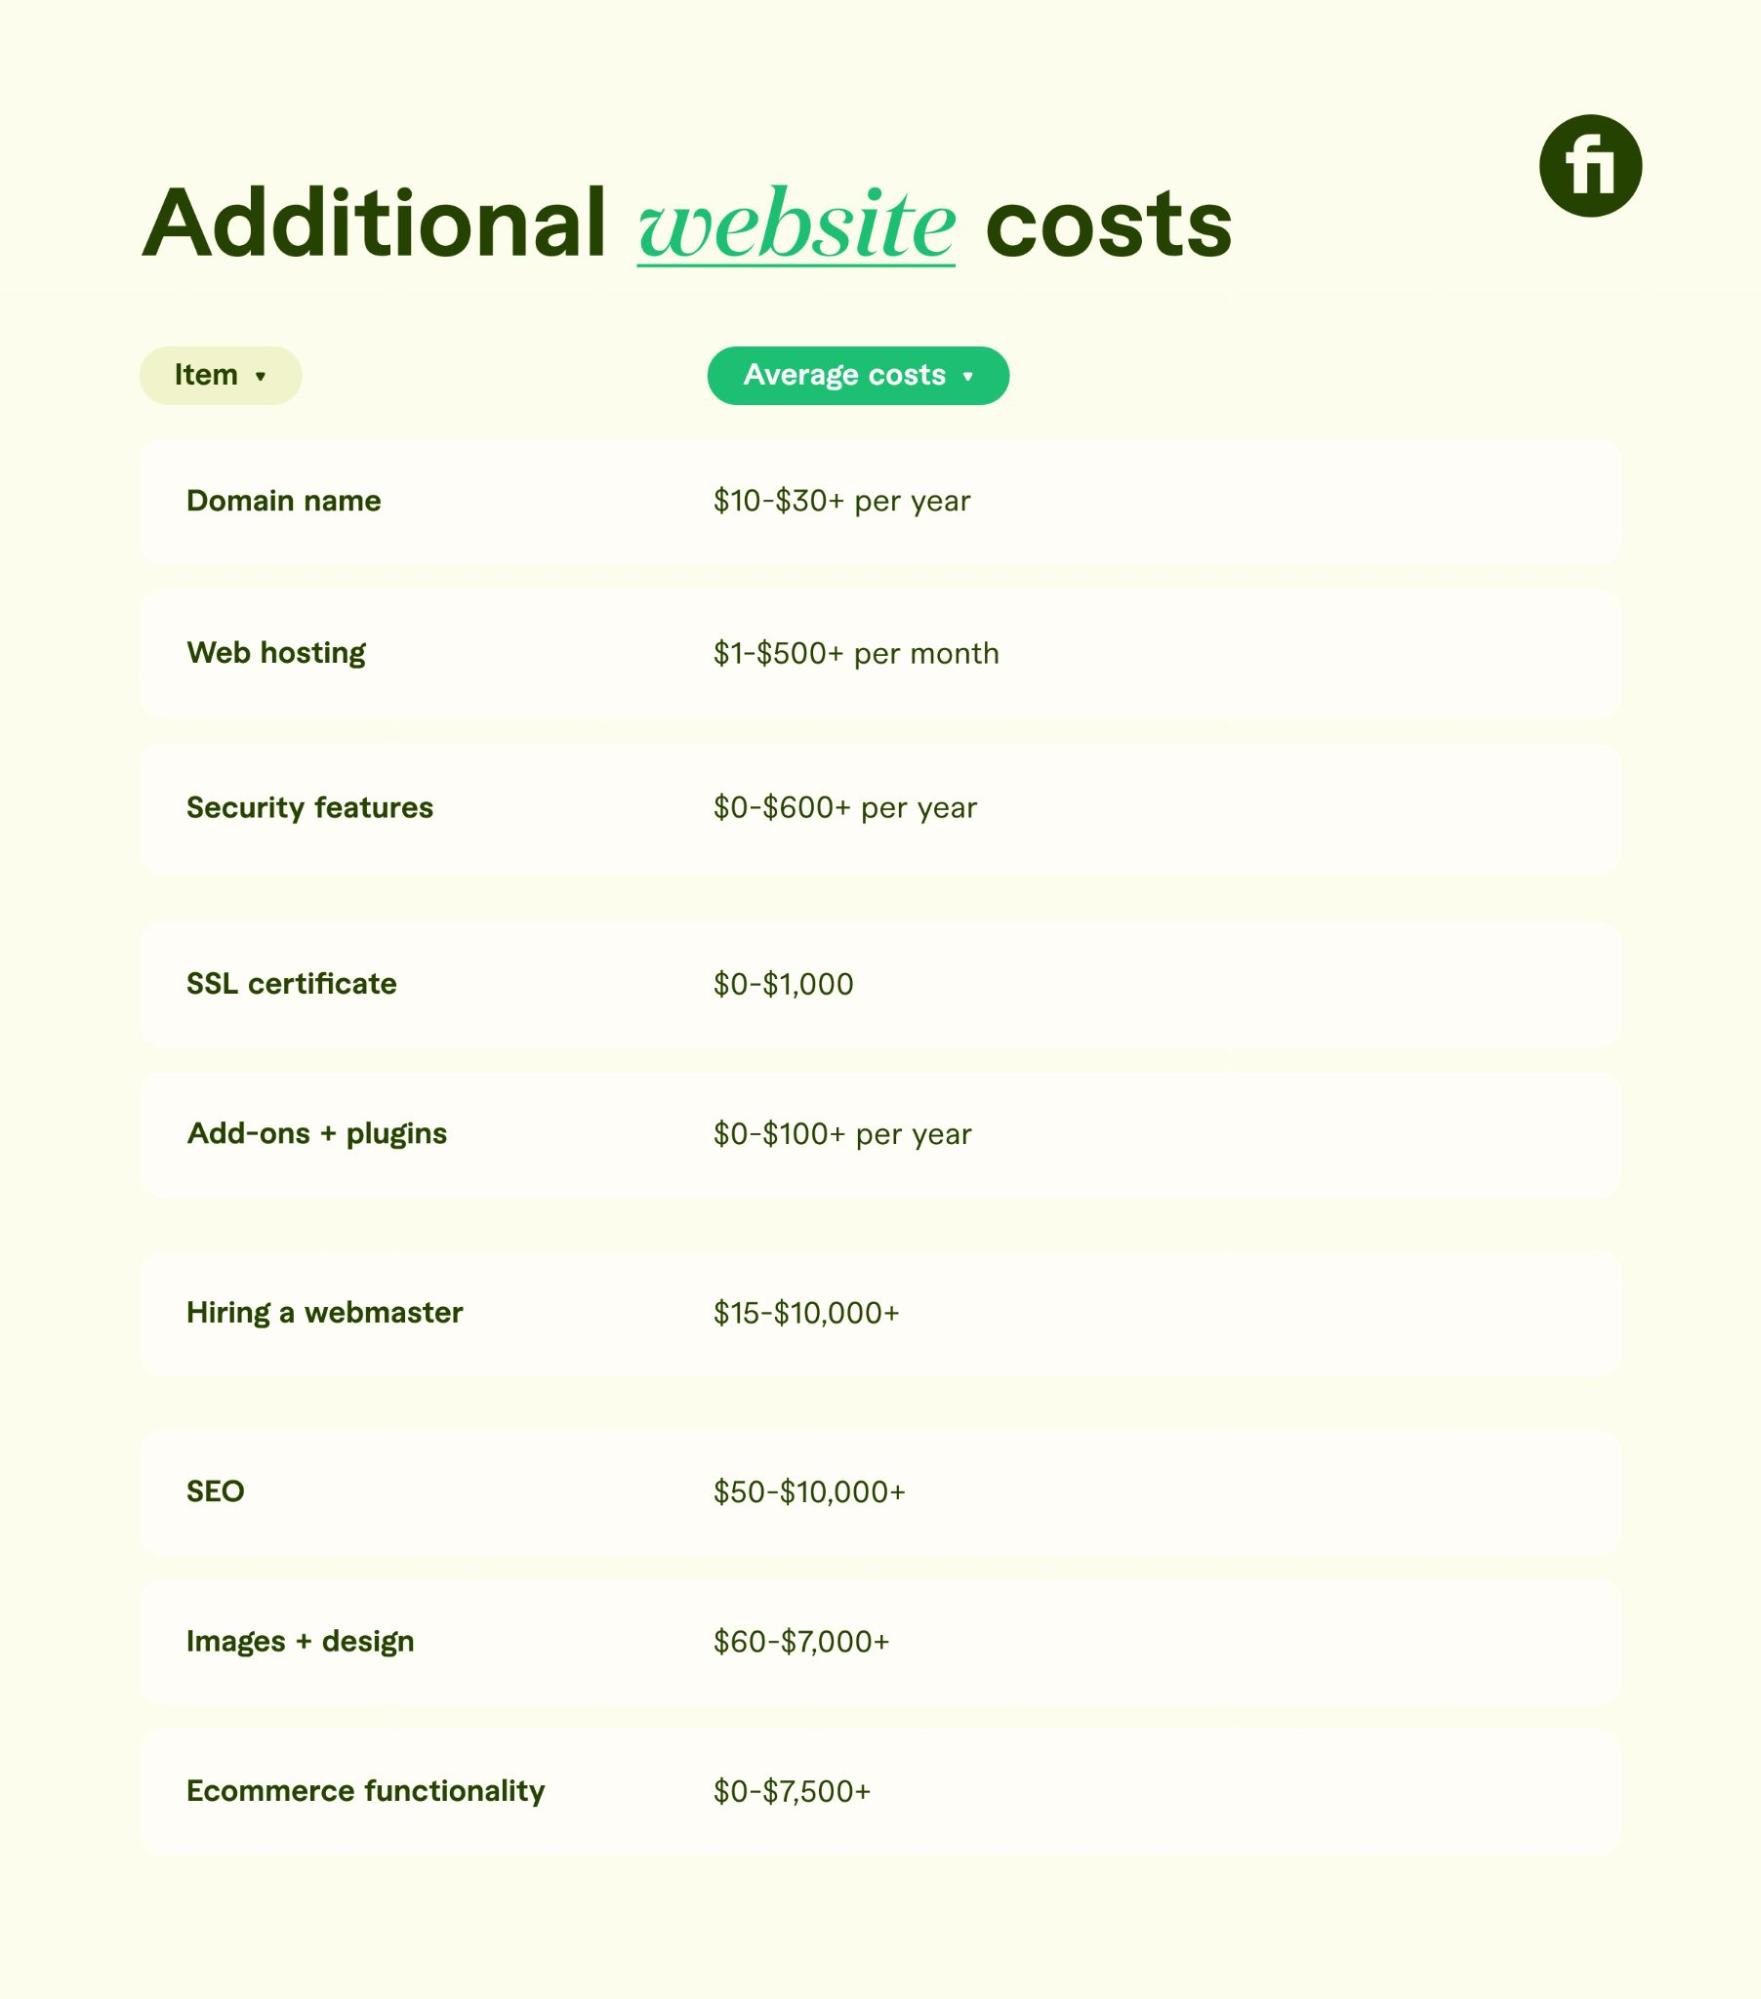 graphic showing additional website costs like SSL certificate and web hosting